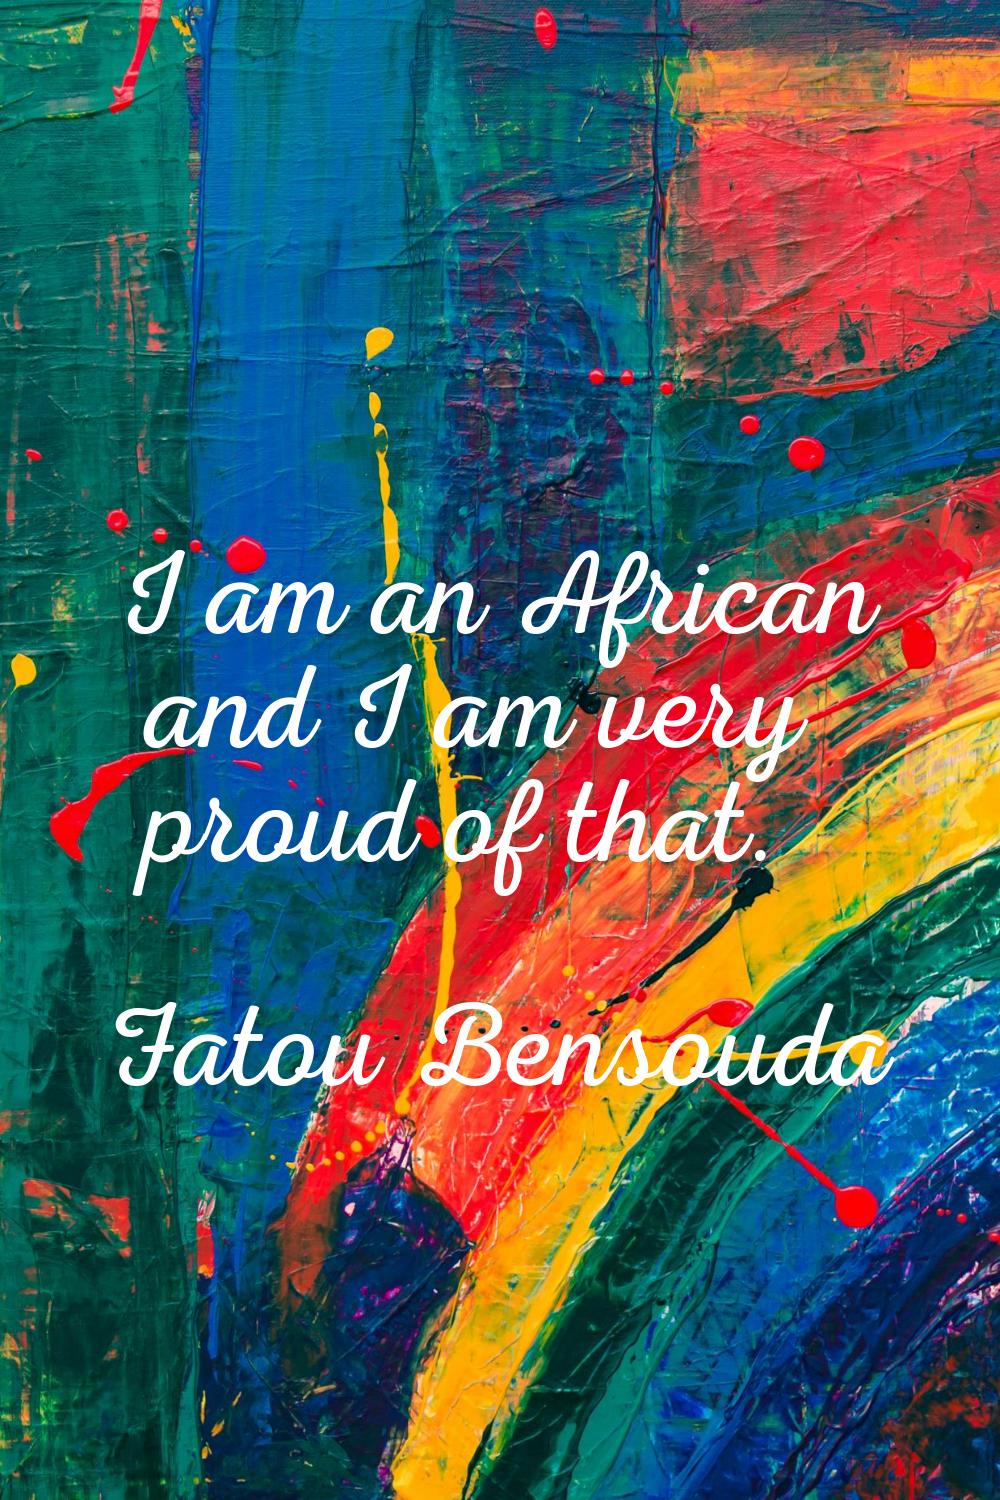 I am an African and I am very proud of that.